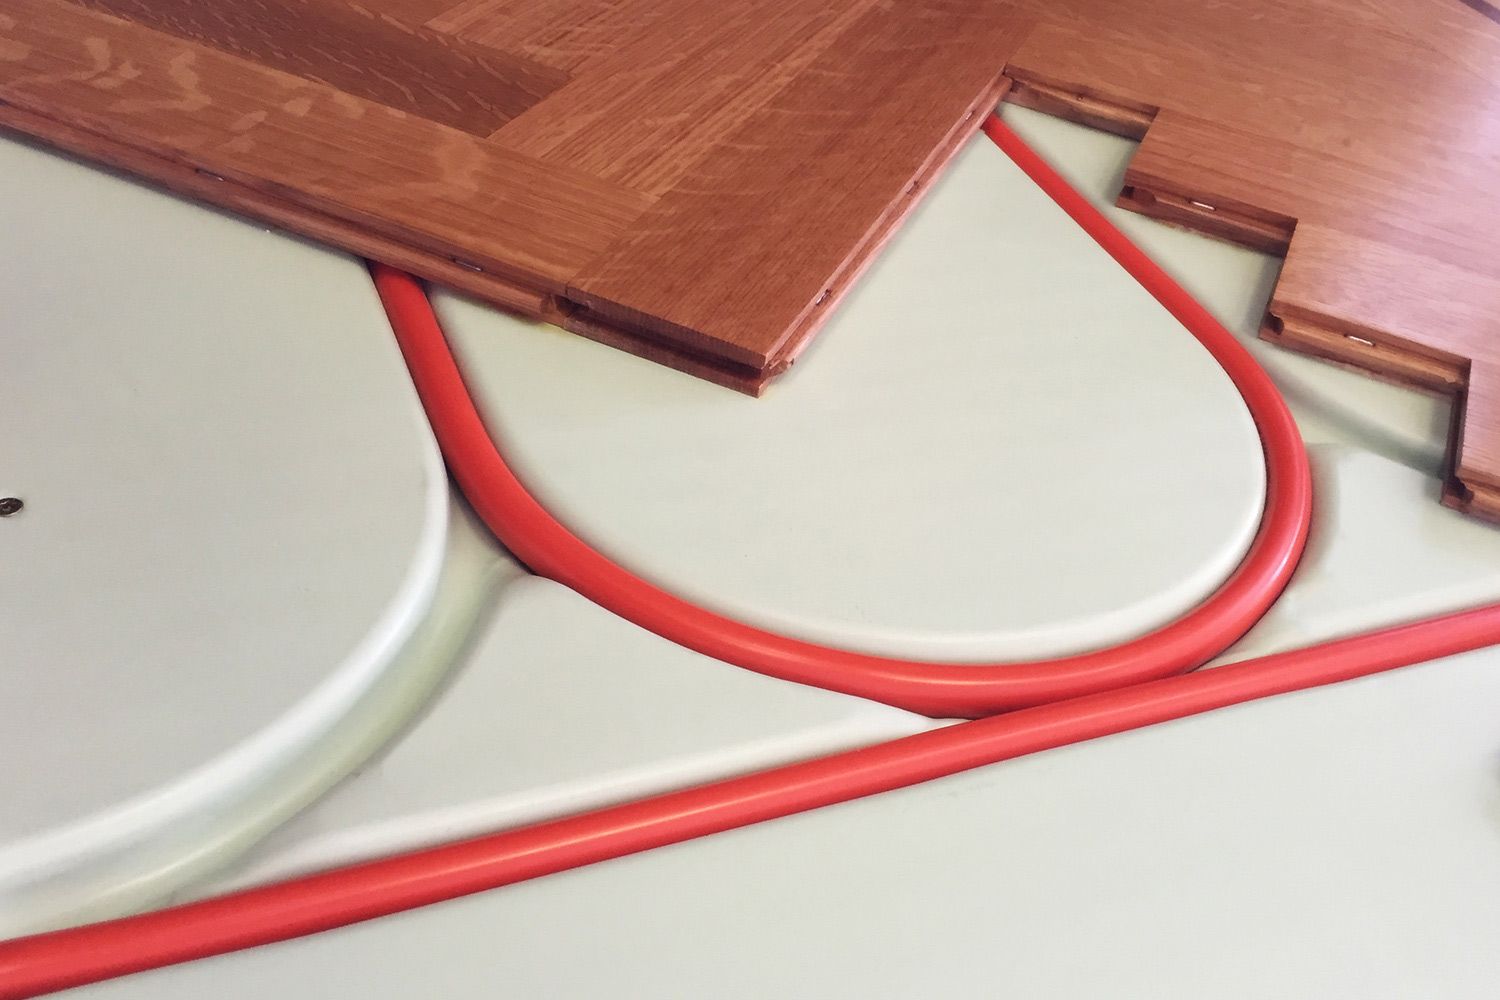 Electric Floor Heating How To Install, Can I Install Radiant Heat Under Hardwood Floors